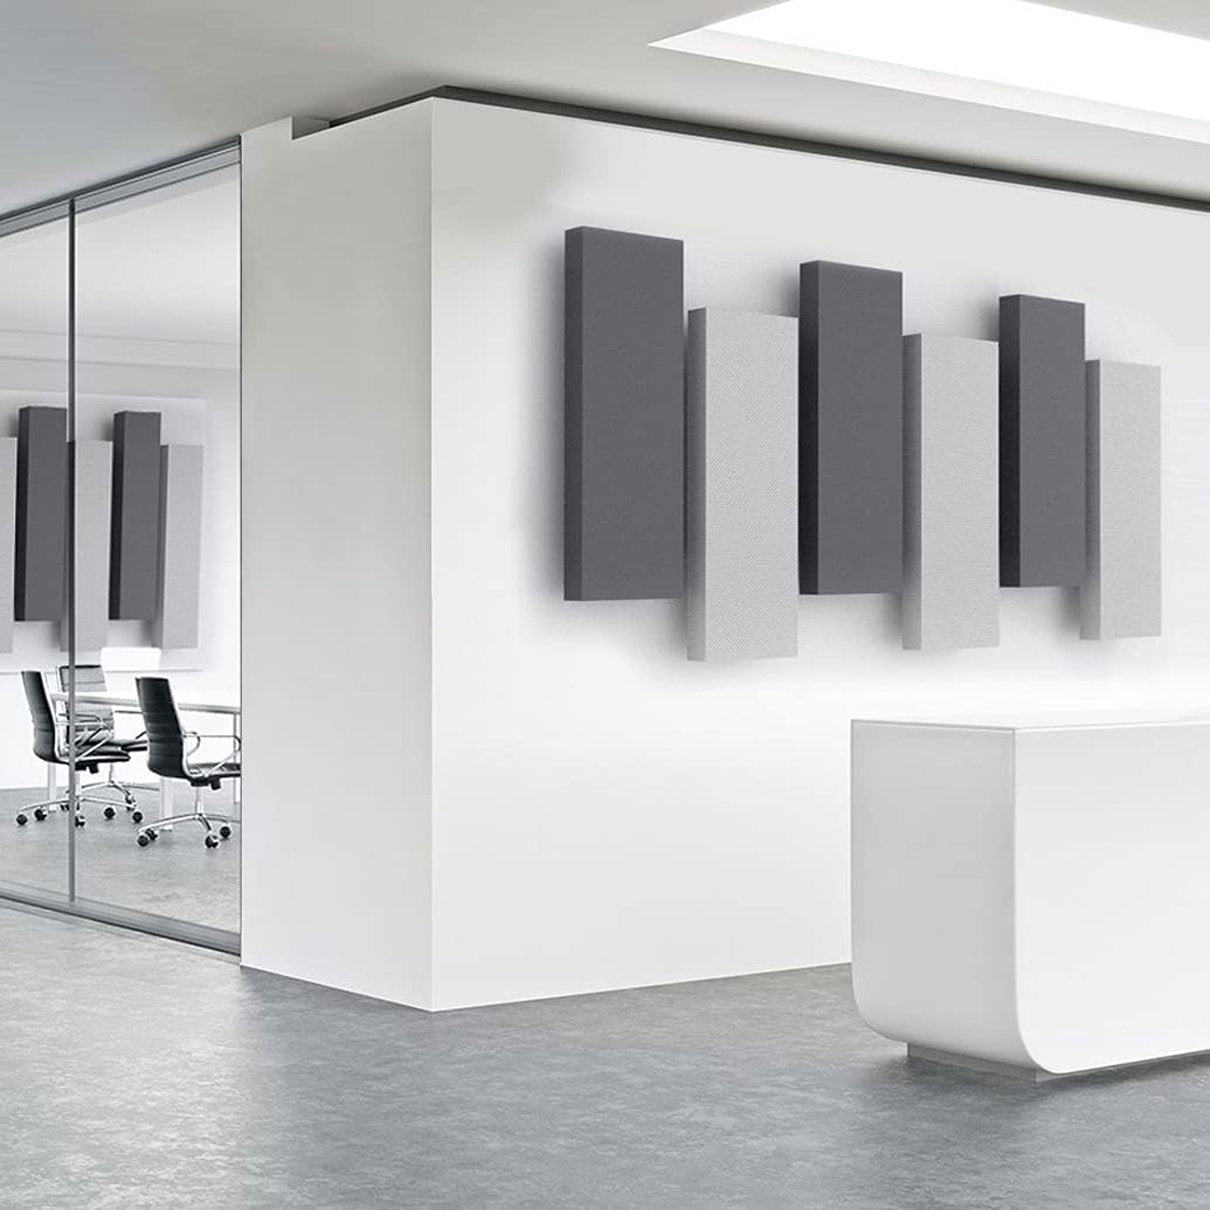 Acoustic Solutions for Different Office Layouts